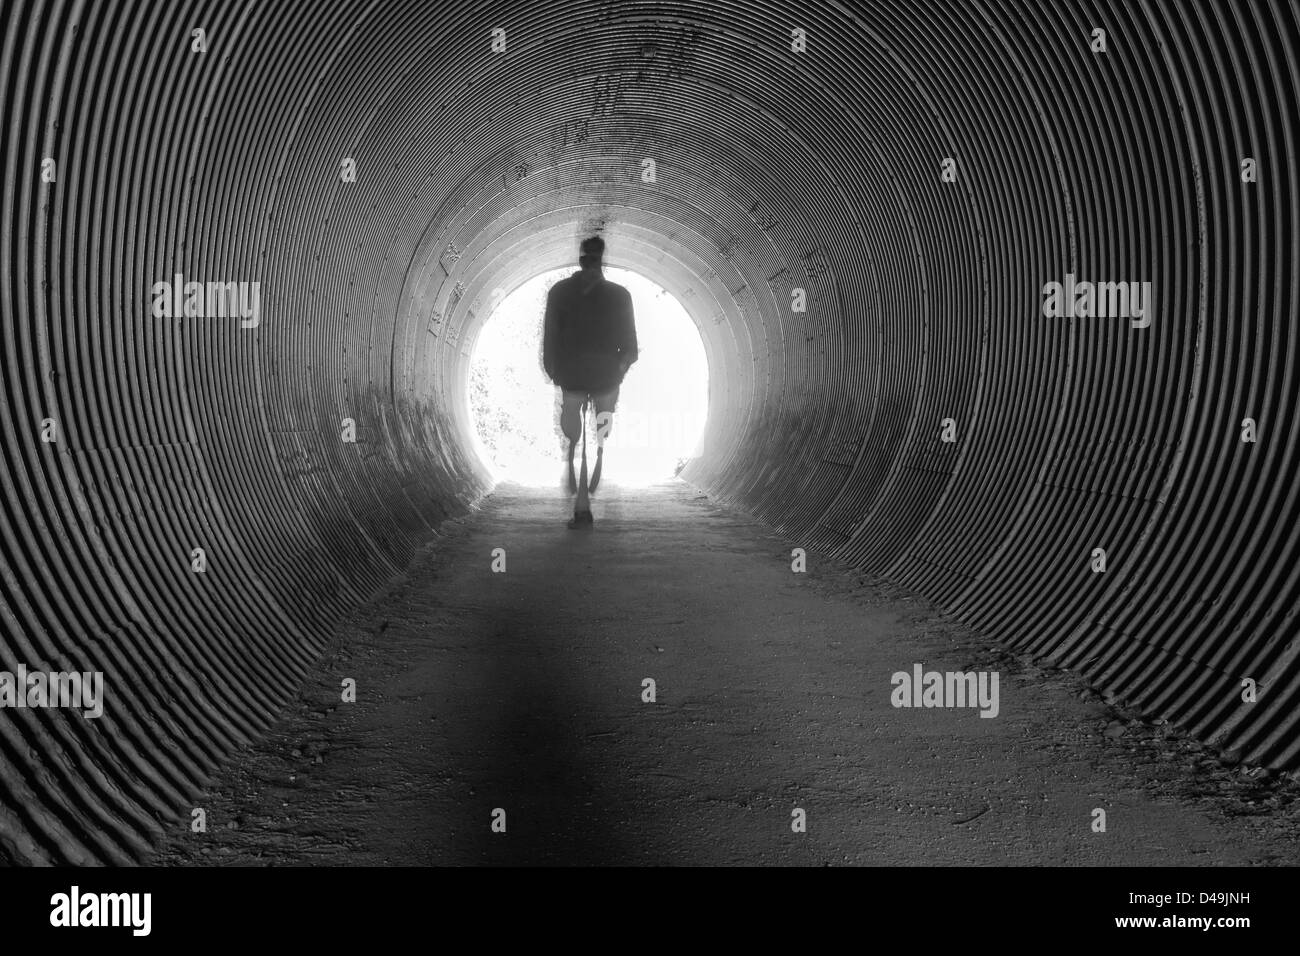 A single man walks through a long tunnel into the light of the unknown. Stock Photo